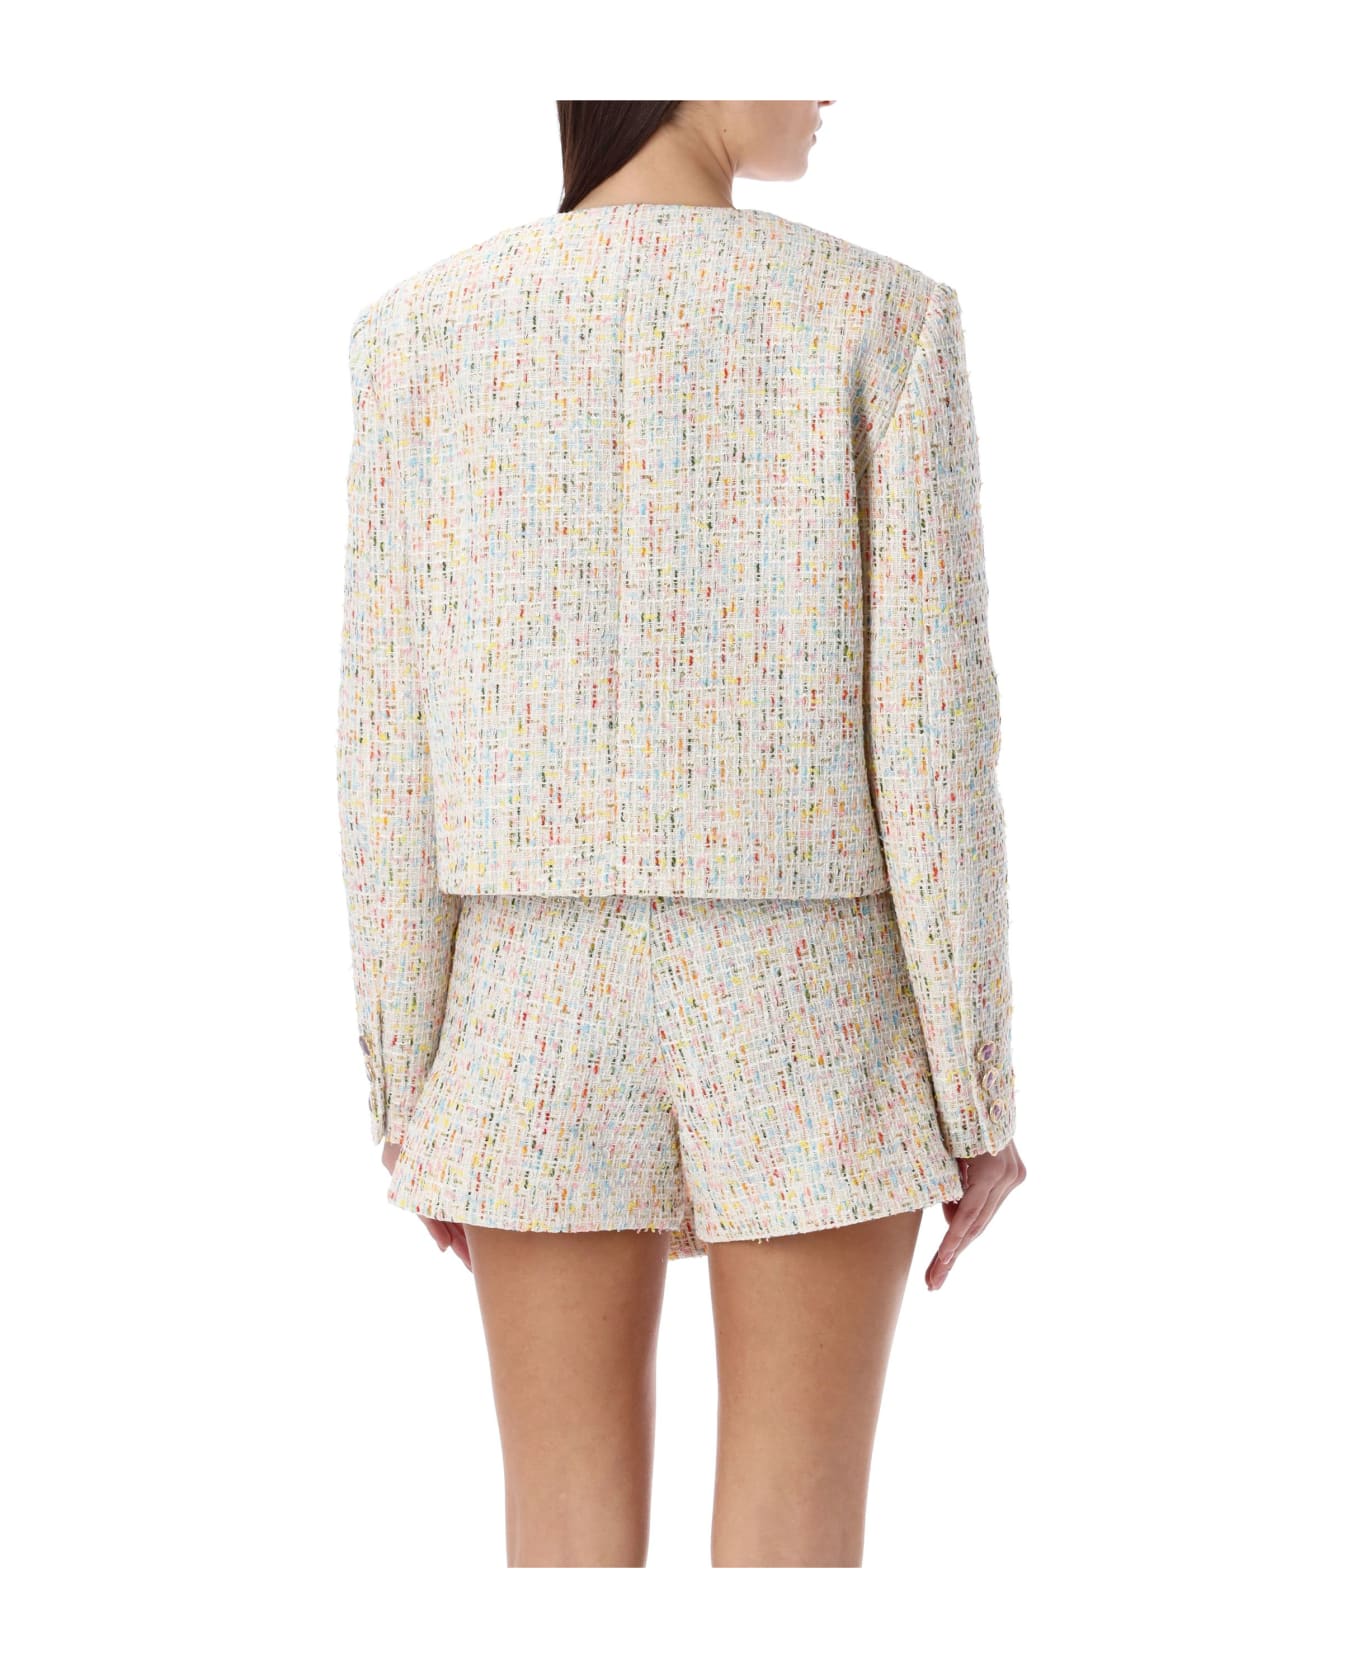 MSGM Tweed Cropped Jacket - WHITE MULTICOLOR